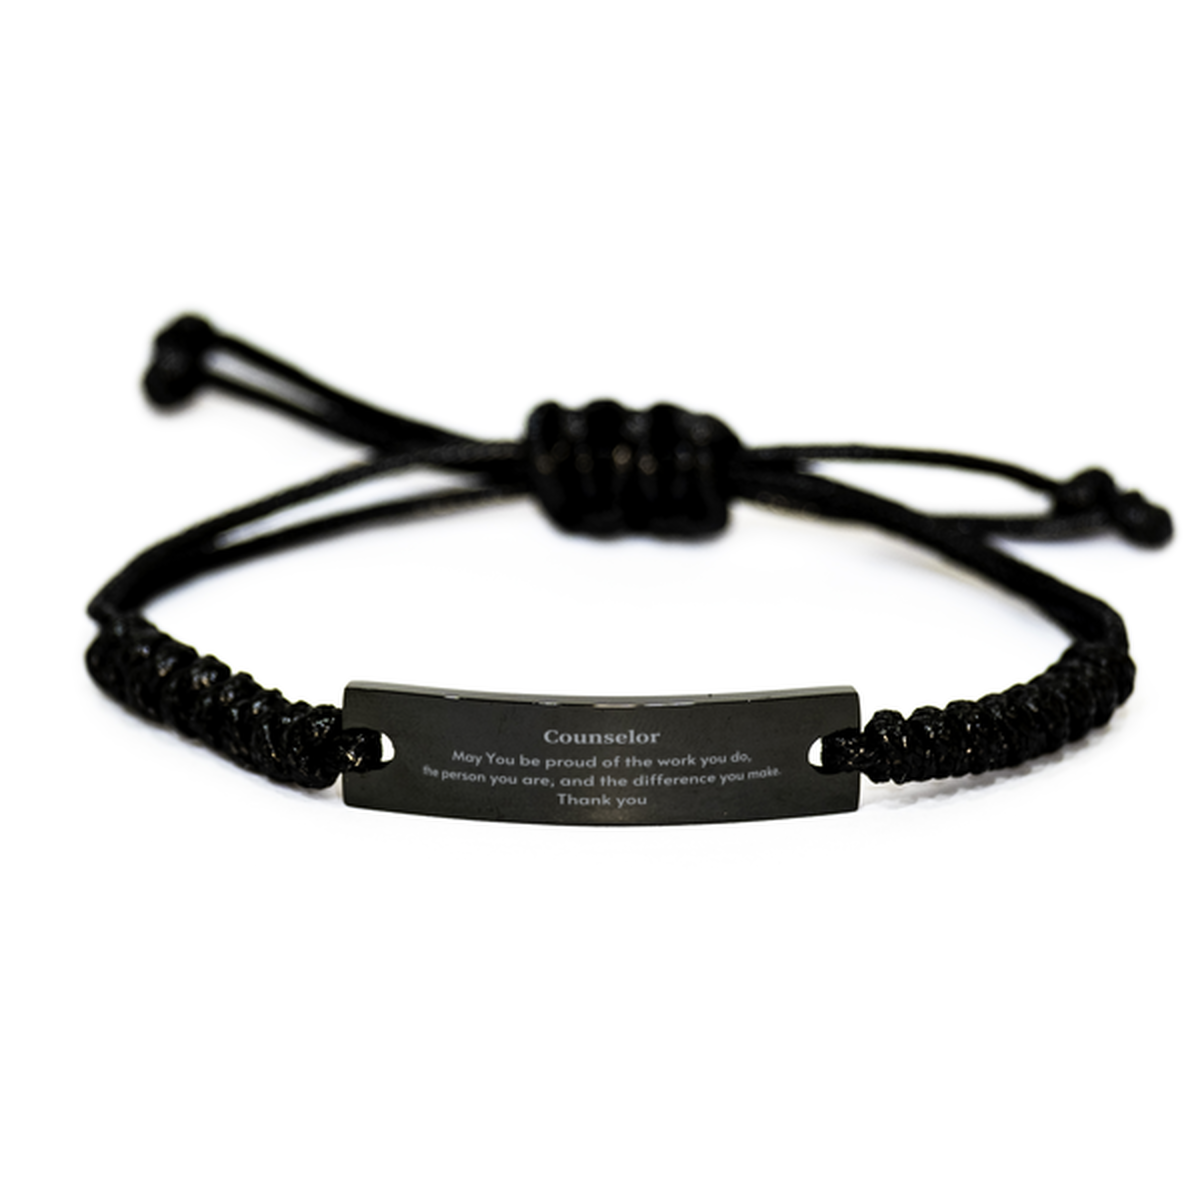 Heartwarming Black Rope Bracelet Retirement Coworkers Gifts for Counselor, Counselor May You be proud of the work you do, the person you are Gifts for Boss Men Women Friends